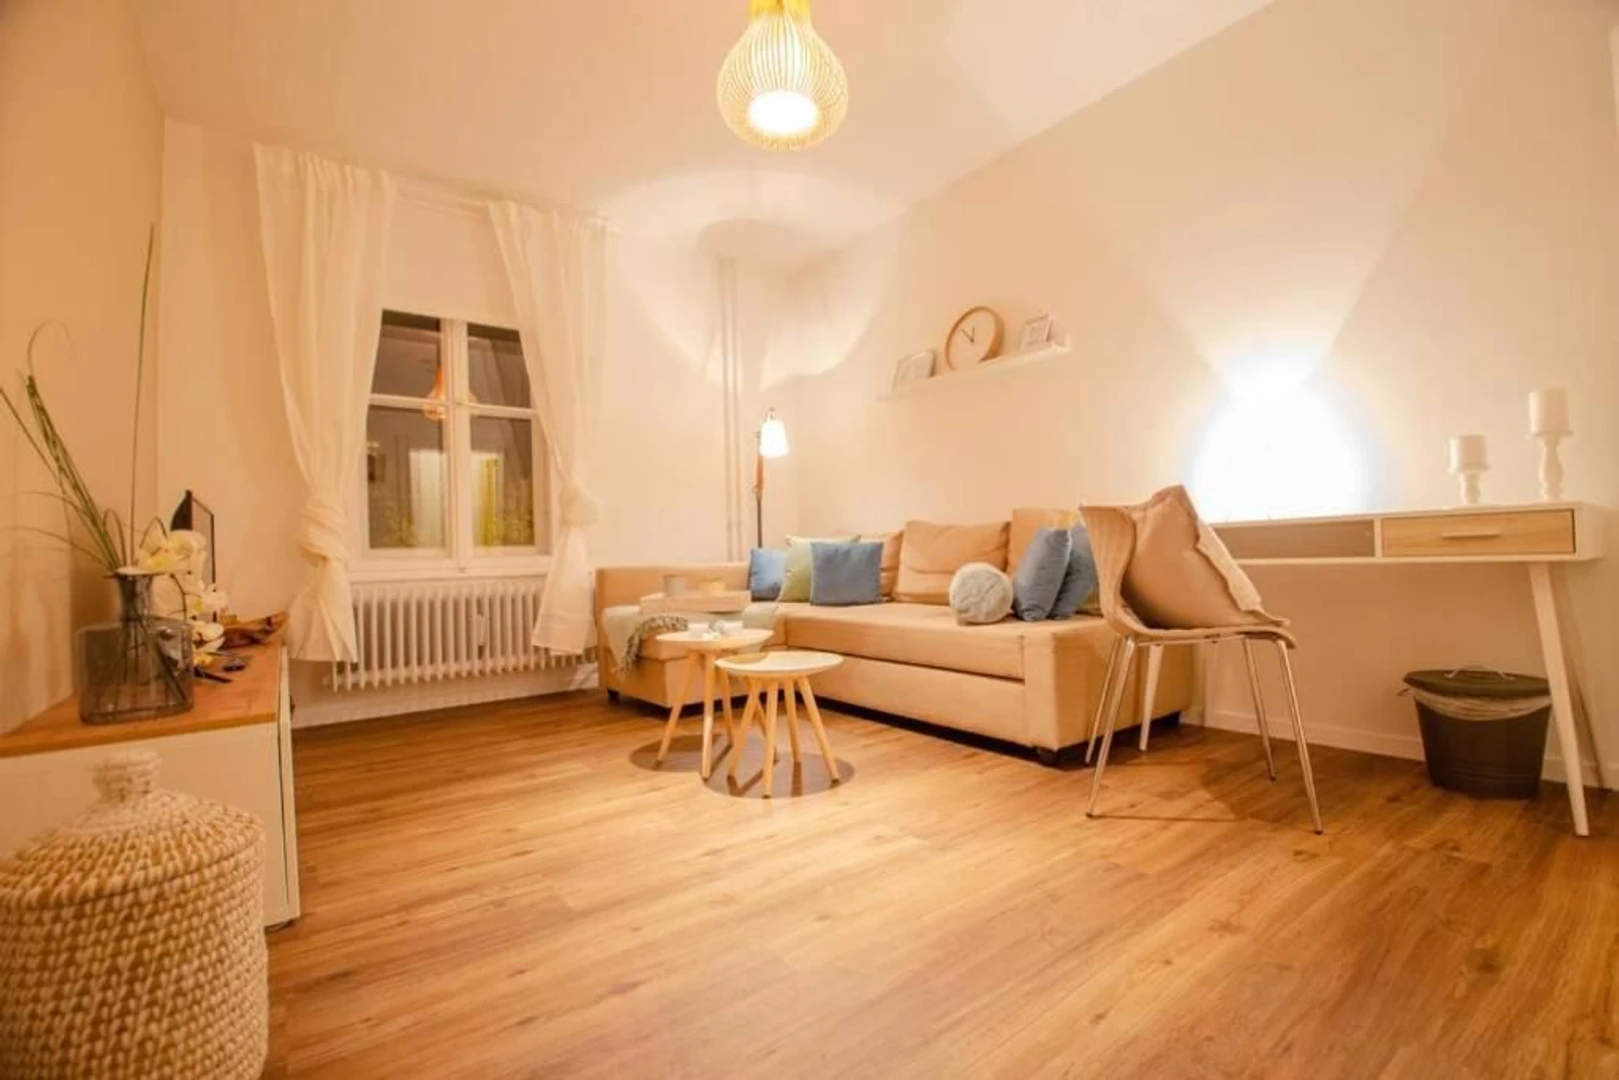 Renting rooms by the month in Wolfsburg